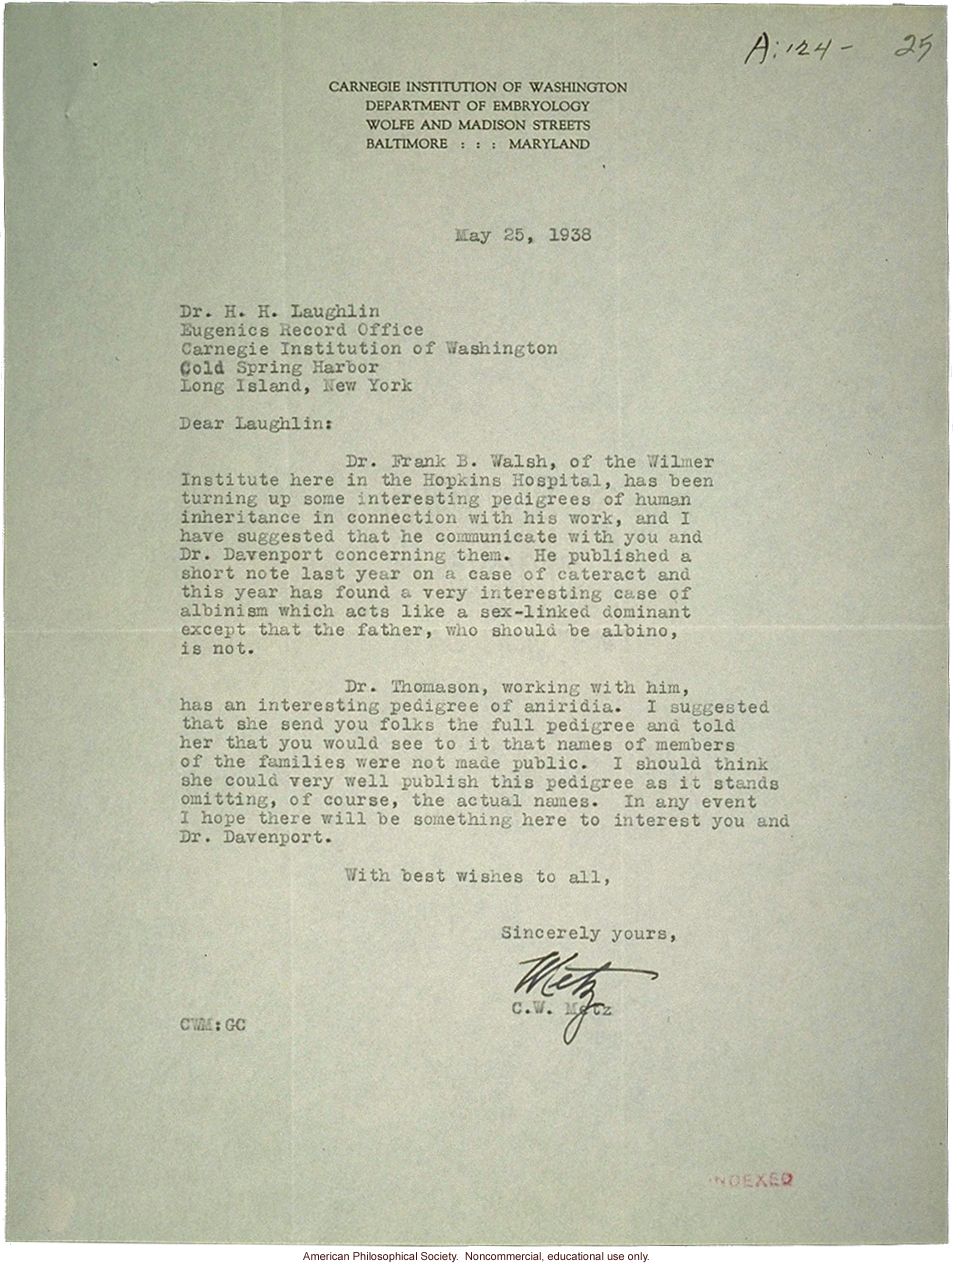 C. Metz letter to H. Laughlin, about albinism